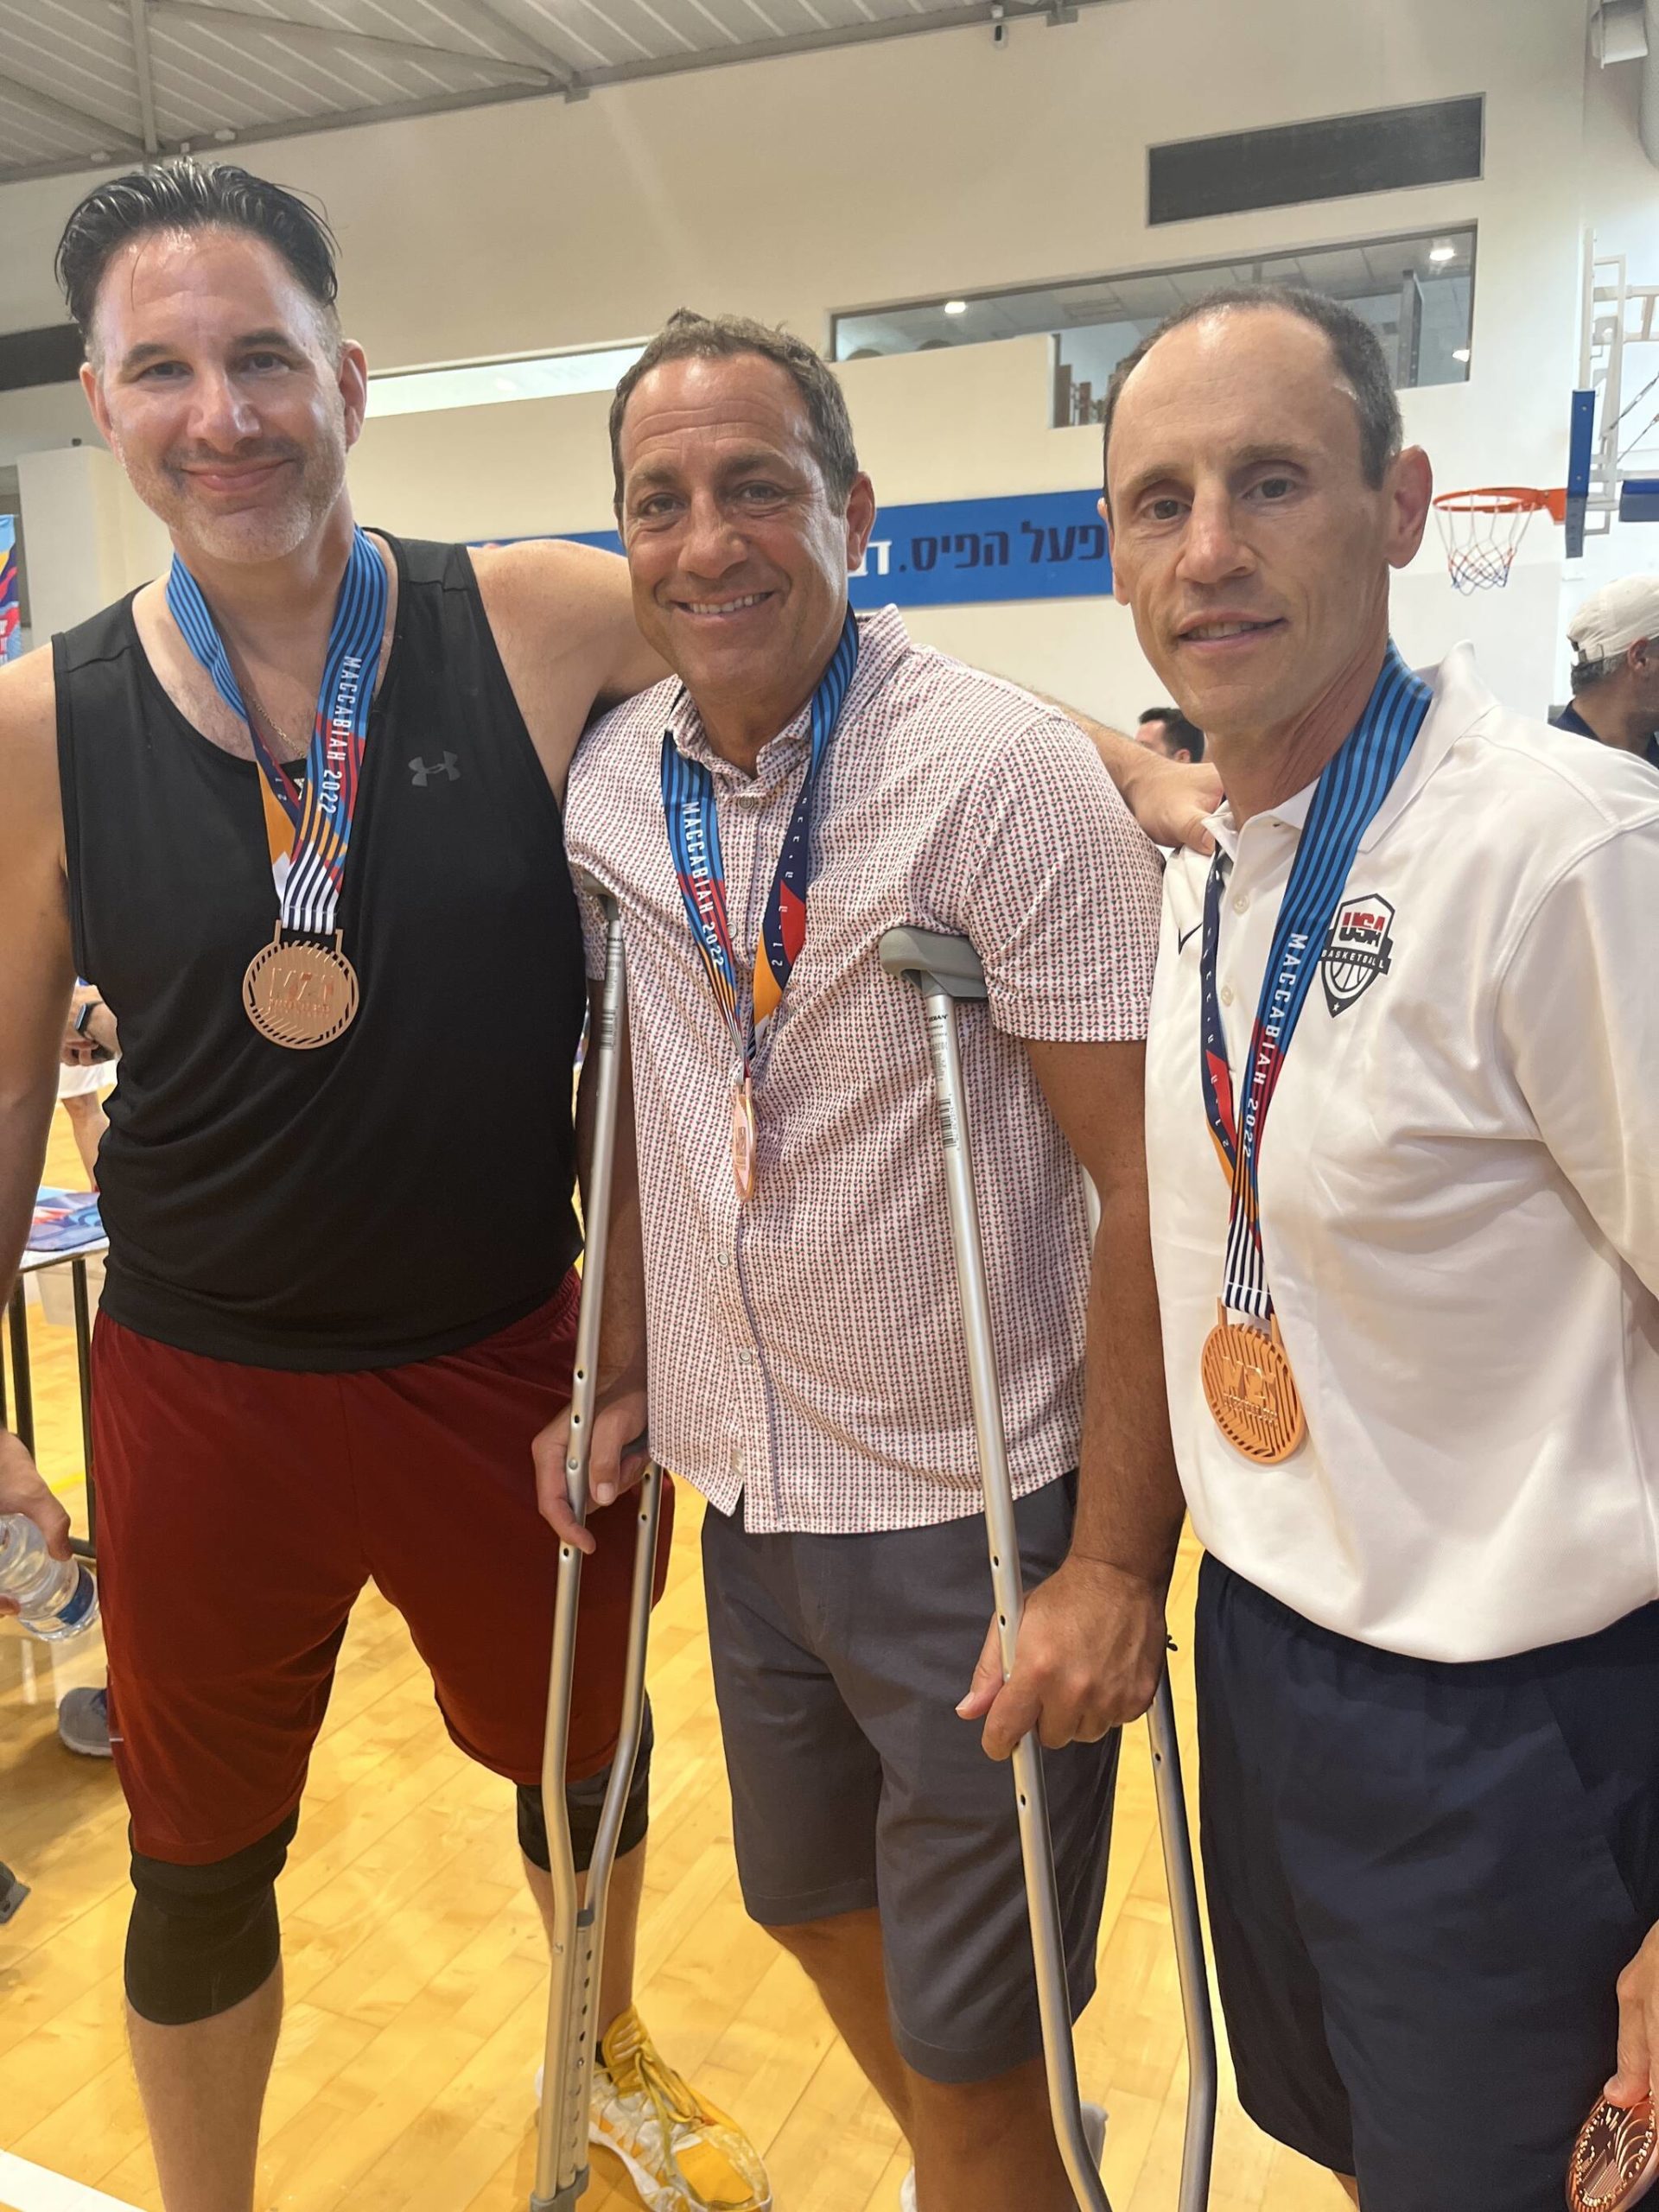 From left to right: Charlie Barokas, Al Moscatel and Glen Coblens gather after the awards ceremonies at last month’s 2022 Maccabiah Games in Israel. Photo courtesy of Mia Birk